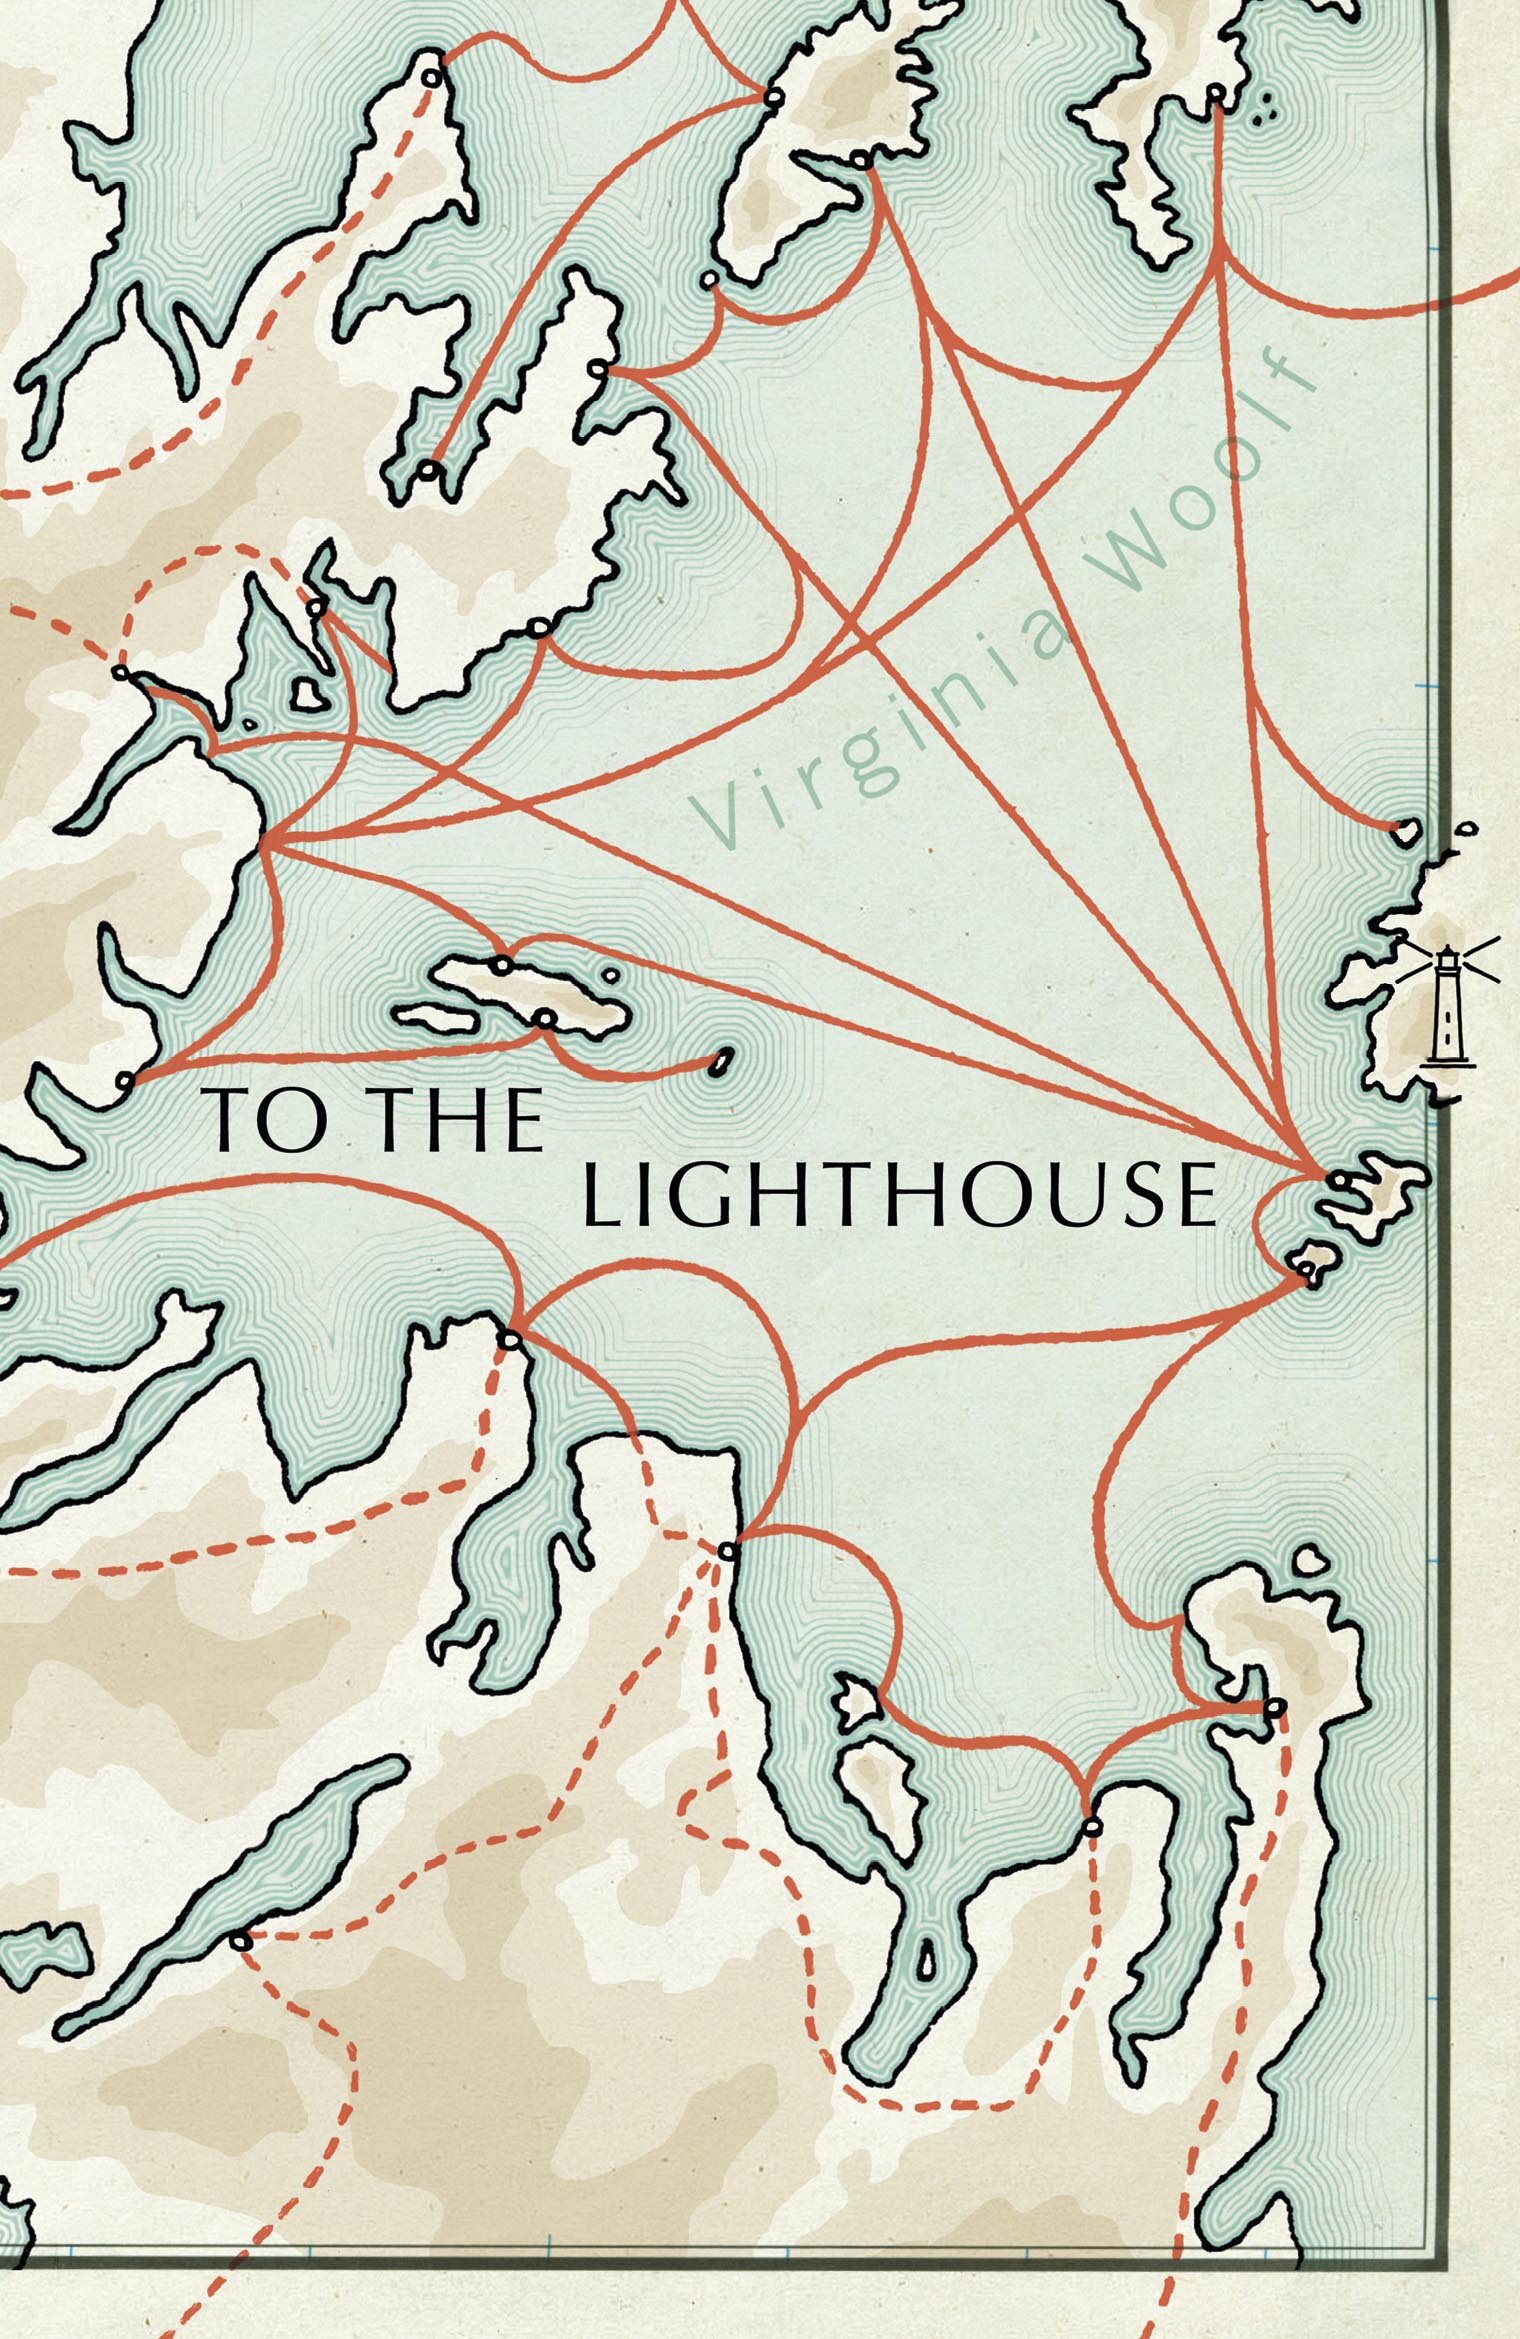 Book “To The Lighthouse” by Virginia Woolf — June 6, 2019